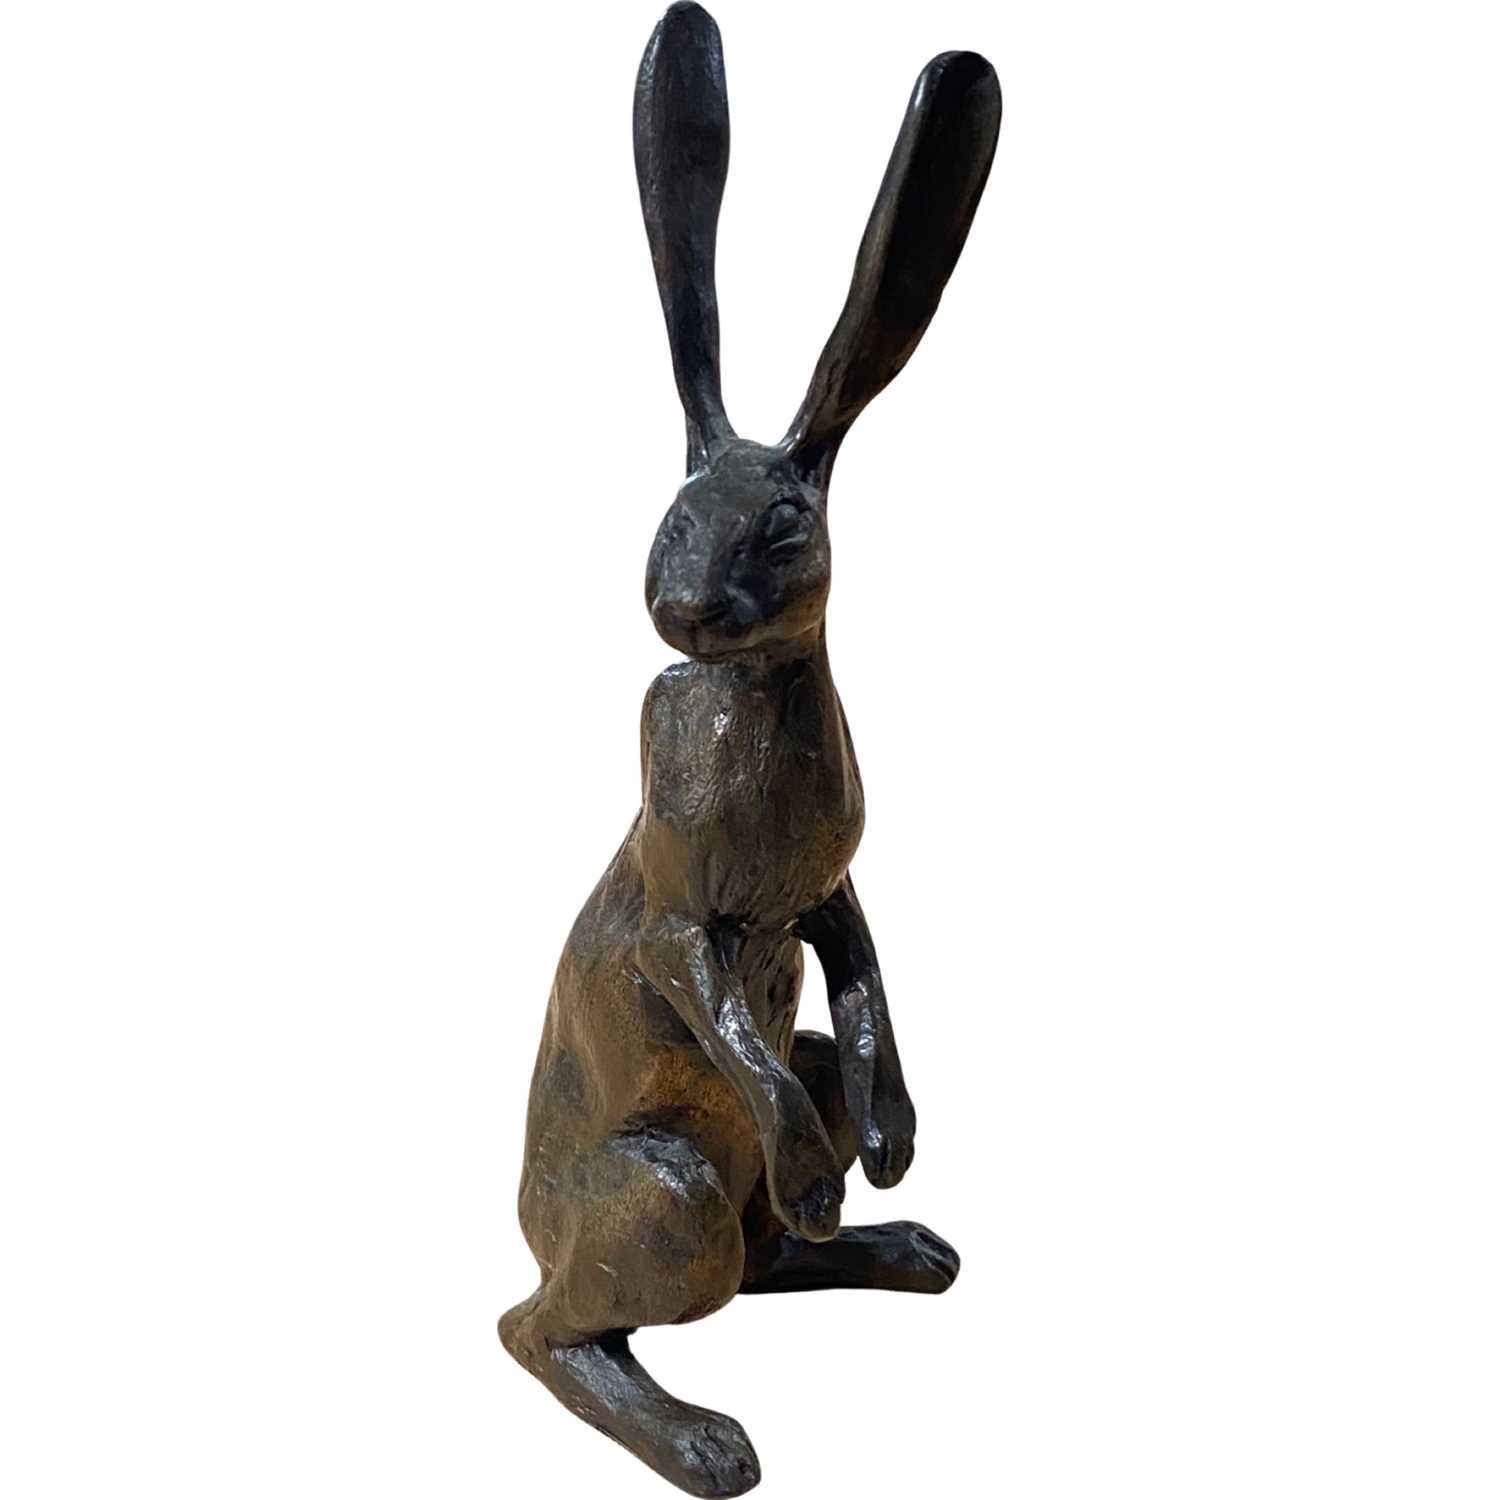 A bronze model of a hare, 16cm high